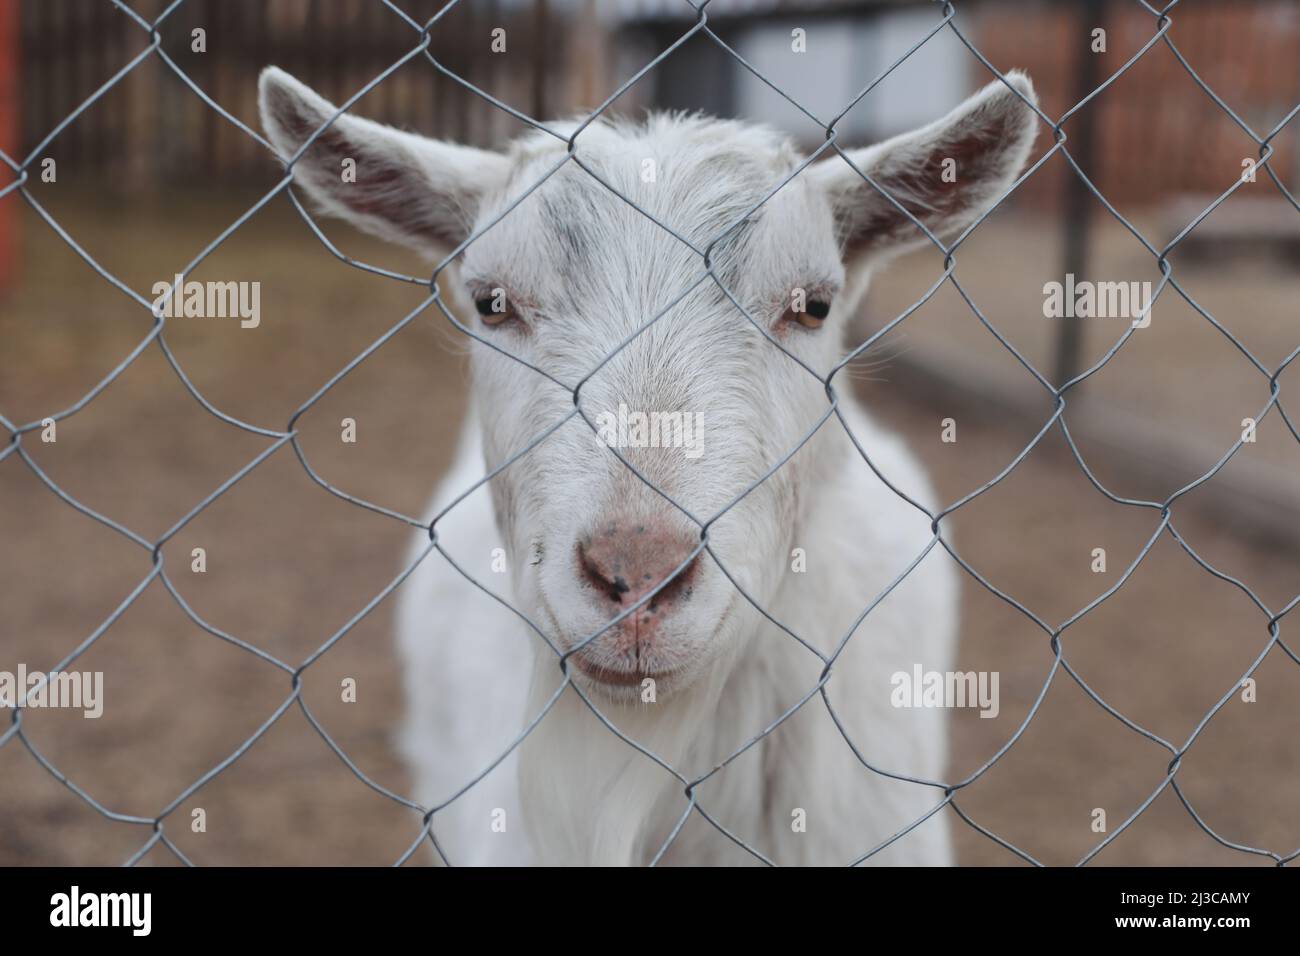 Goat on a farm. Agriculture, domestic cloven-hoofed animals. Stock Photo